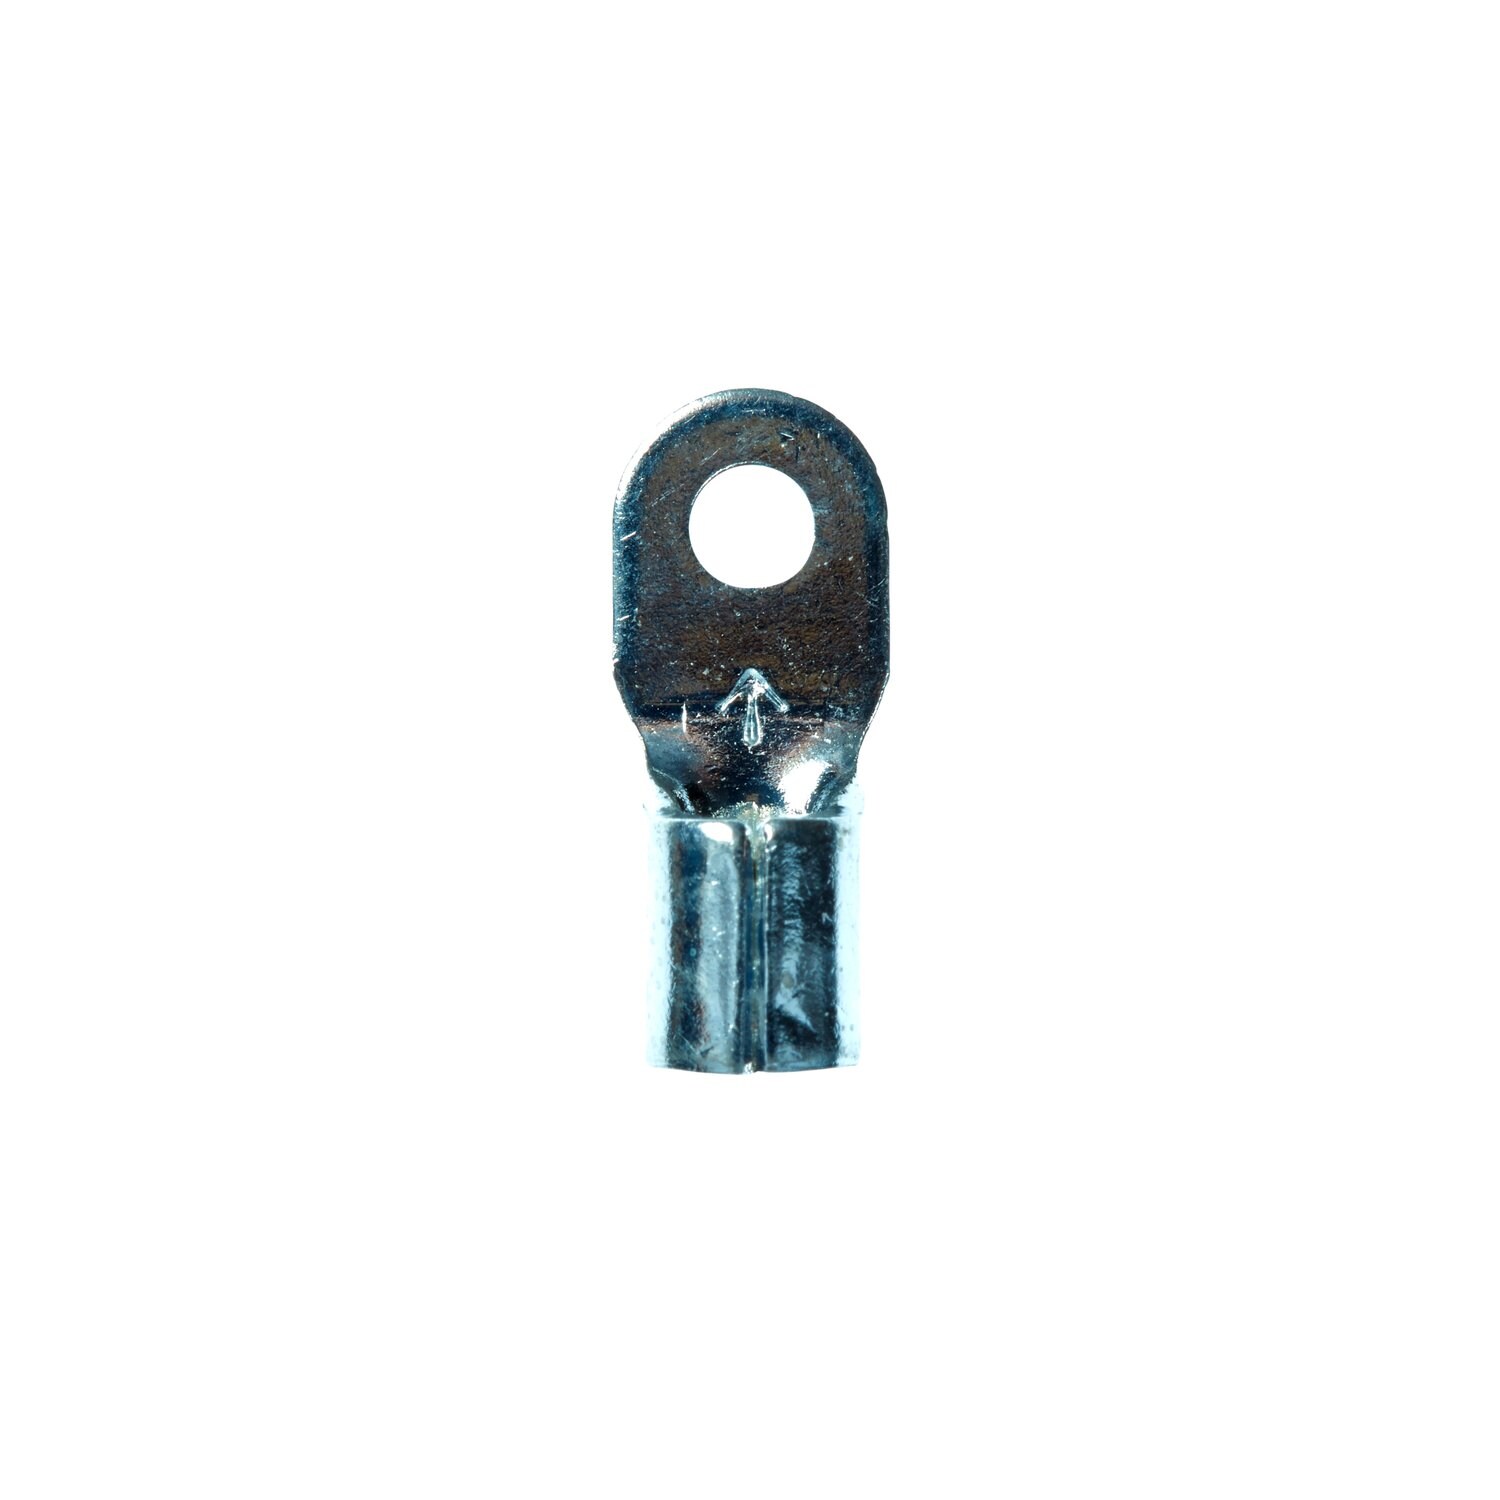 7100164074 - 3M Scotchlok Ring Tongue, Non-Insulated Butted Seam MU10-4R/SK, Stud
Size 4, 500/Case